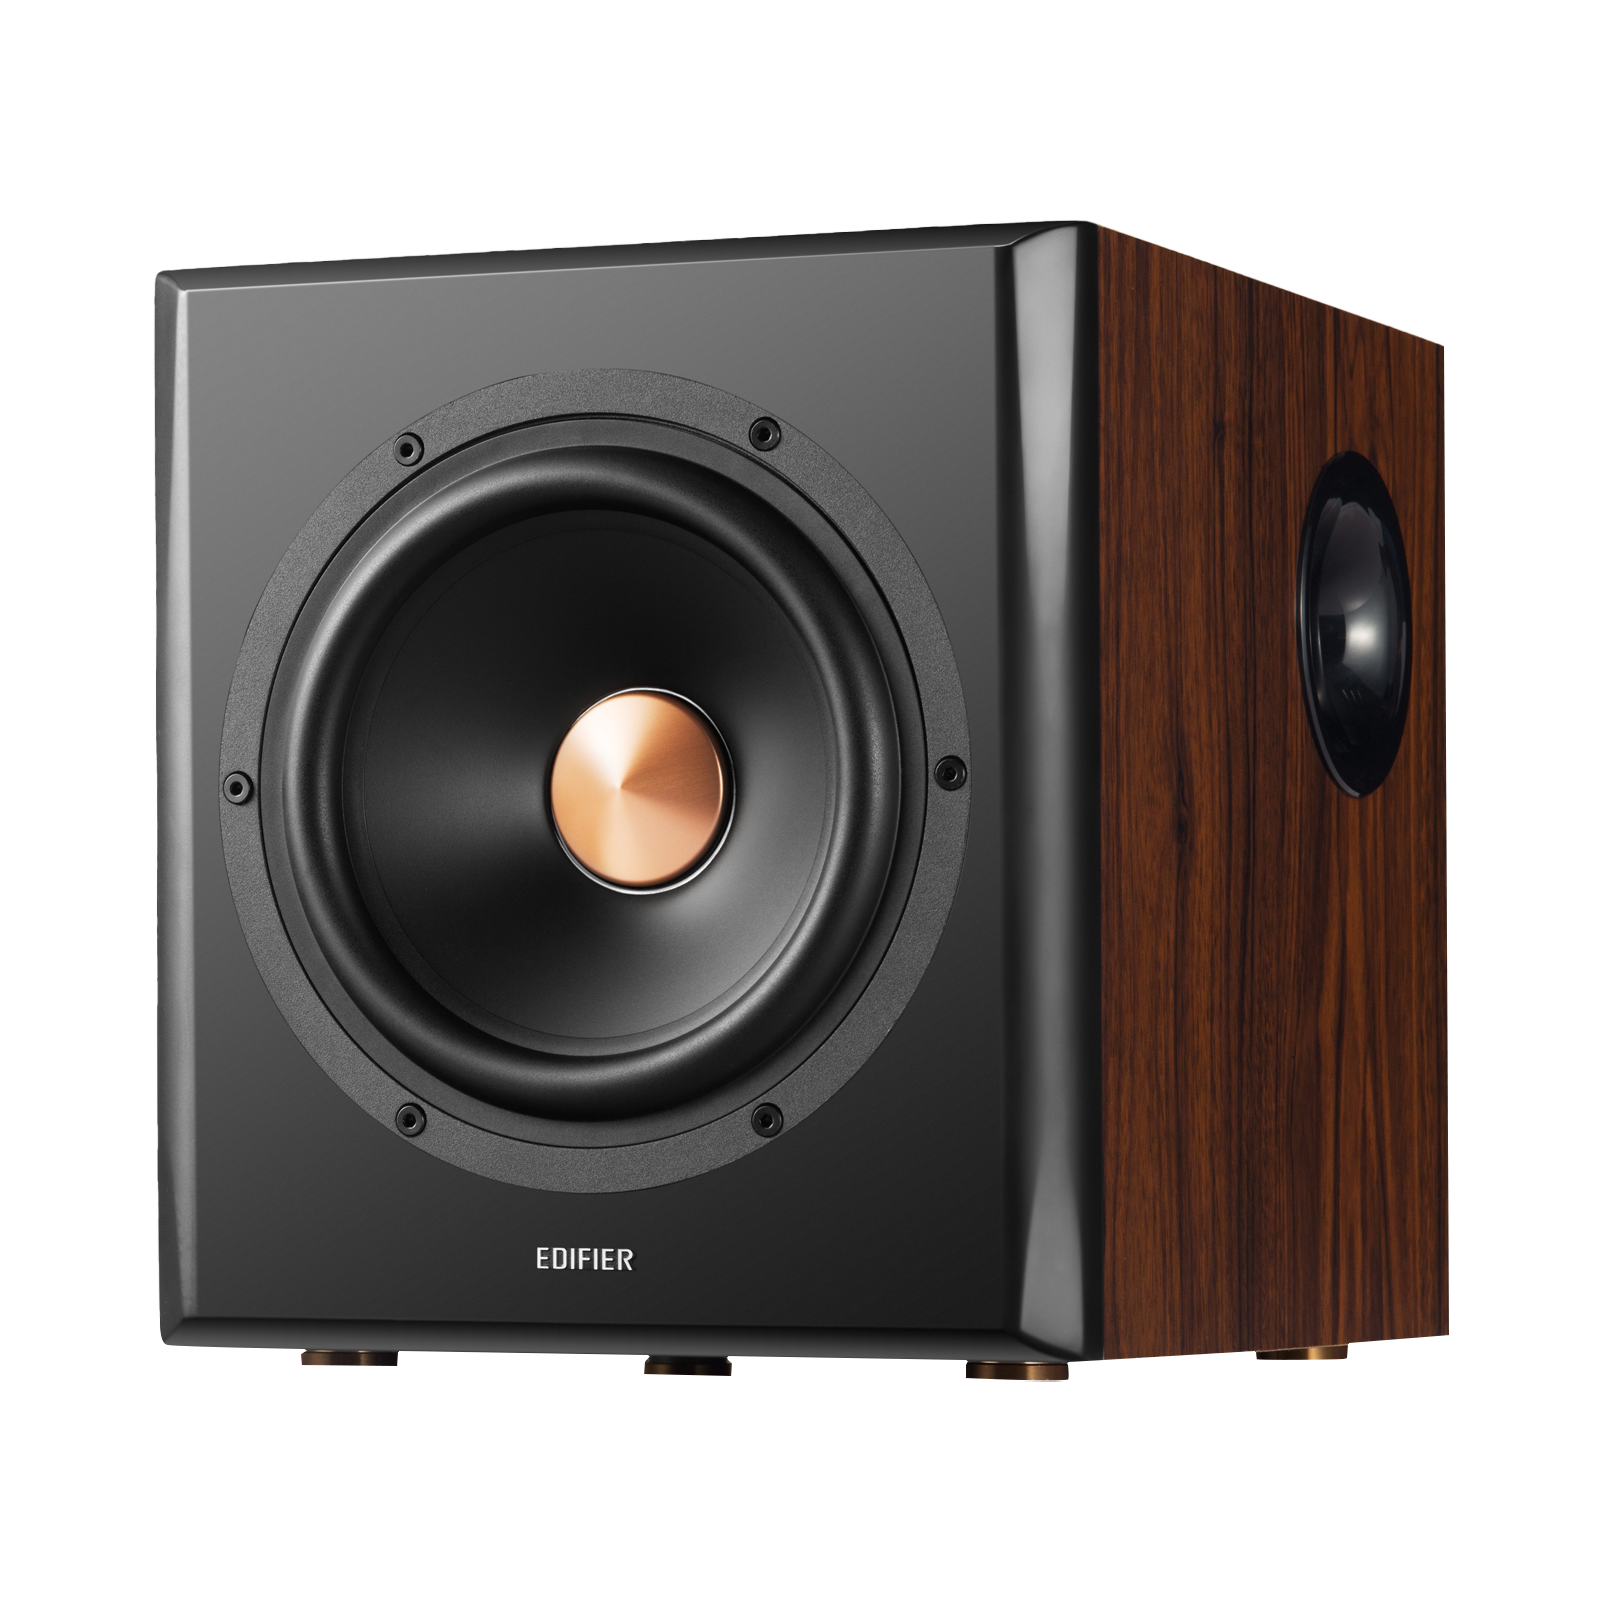 S360DB 2.1 Speakers Hi-Res Audio with wireless subwoofer